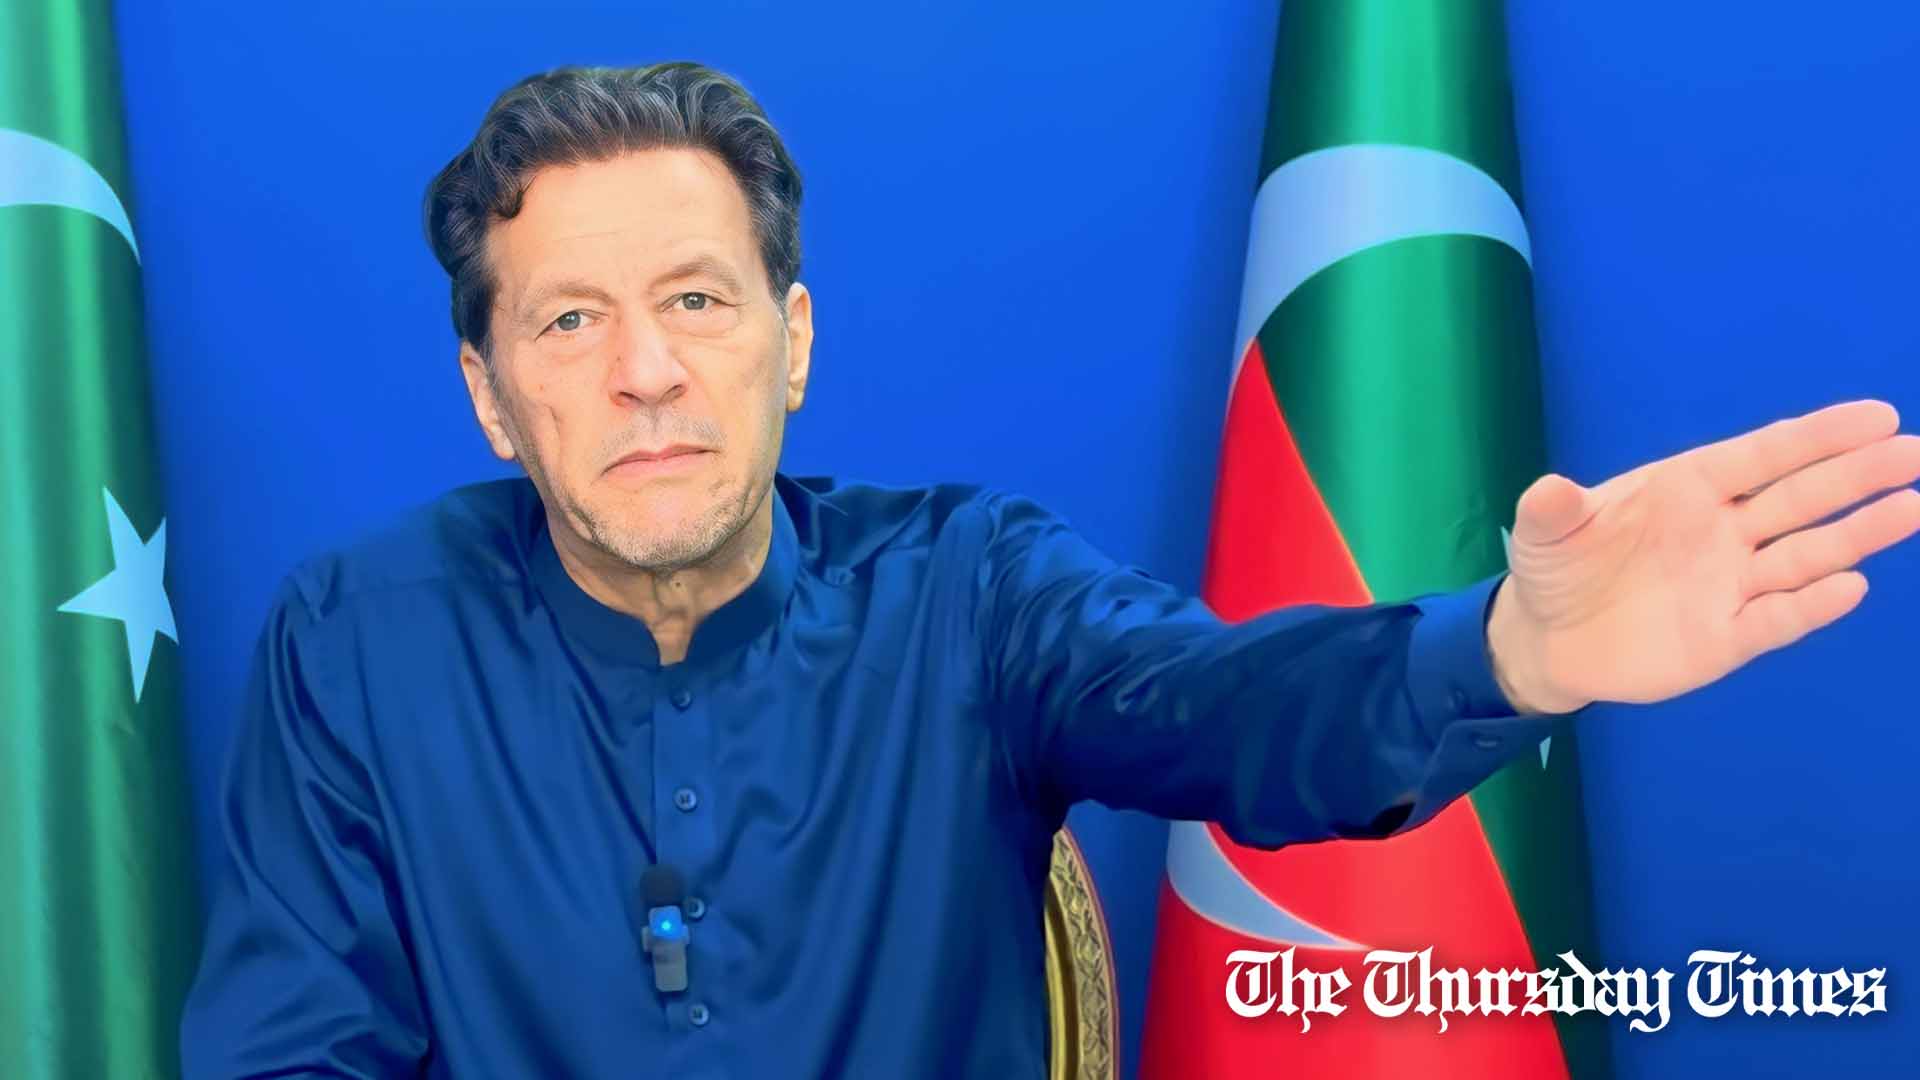 PTI chairman Imran Khan is shown in an address via video-link from his residence at Lahore's Zaman Park. — FILE/THE THURSDAY TIMES